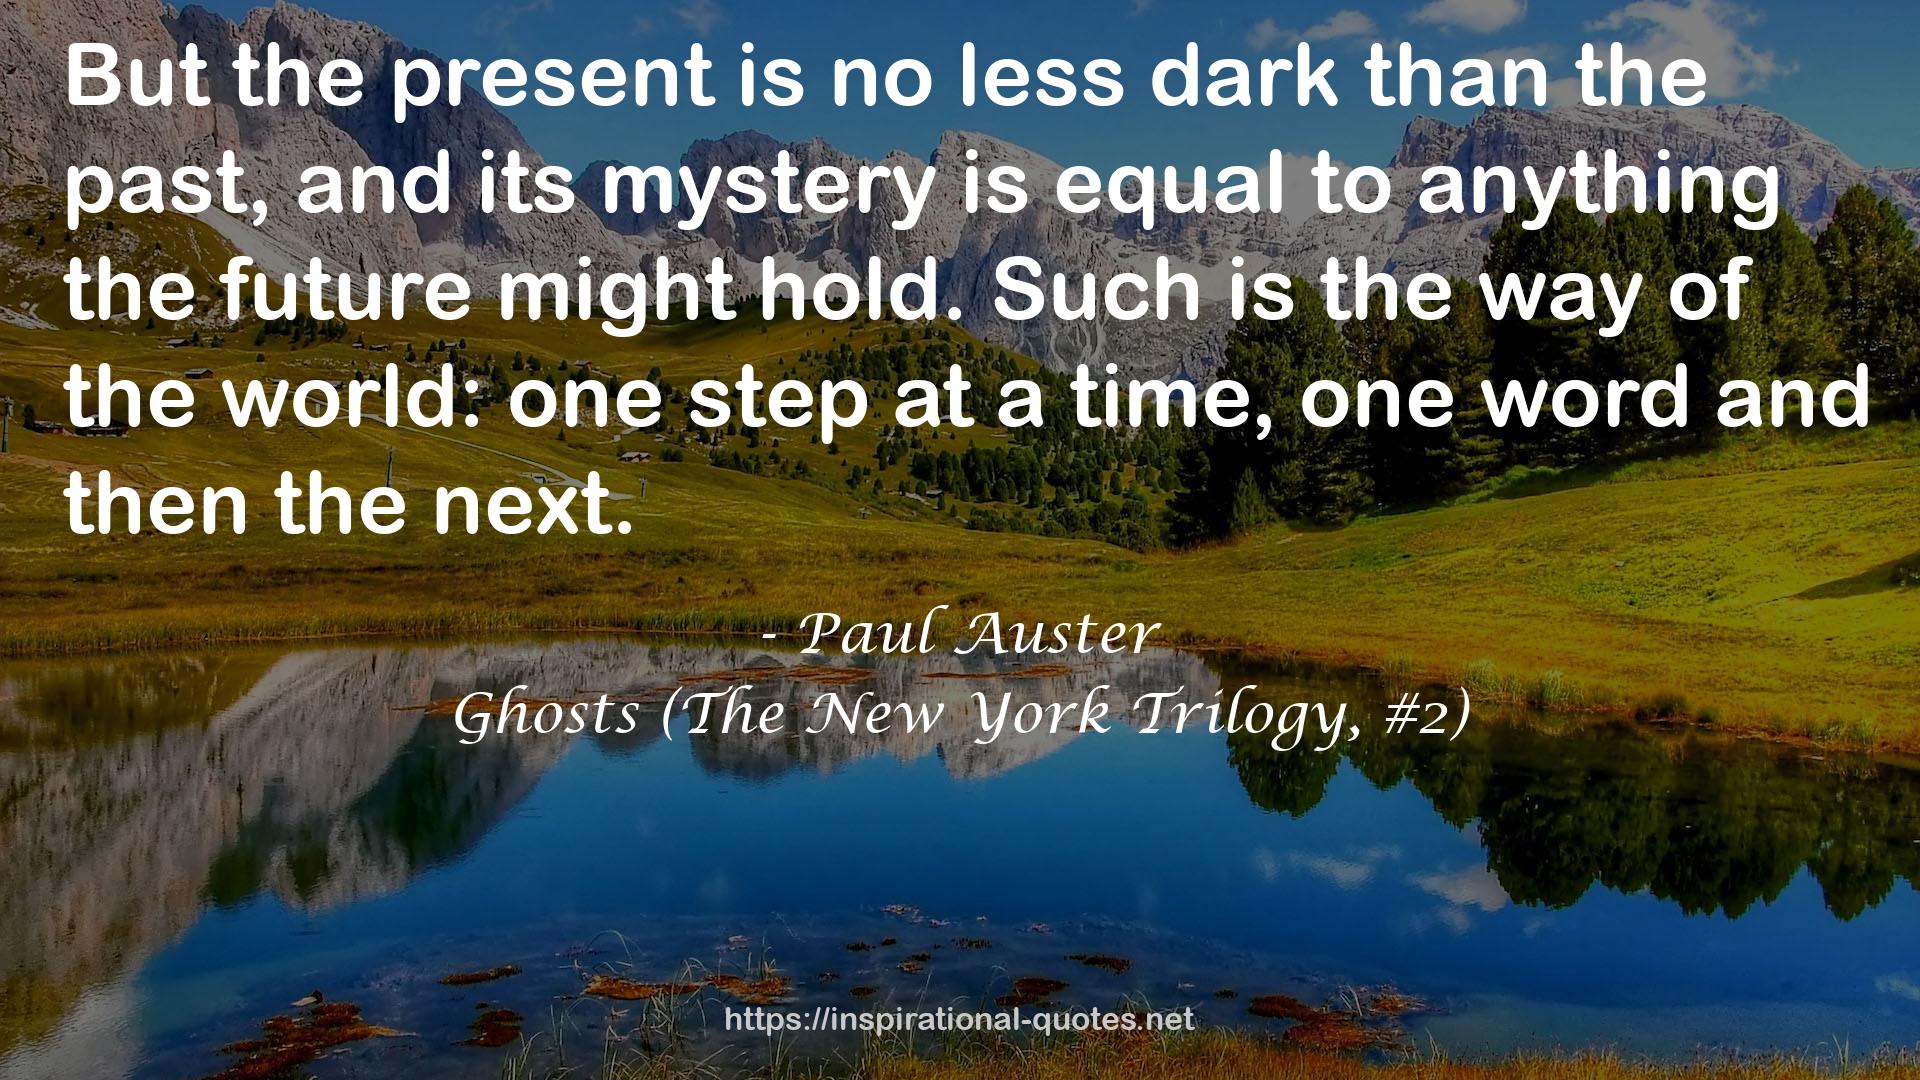 Ghosts (The New York Trilogy, #2) QUOTES